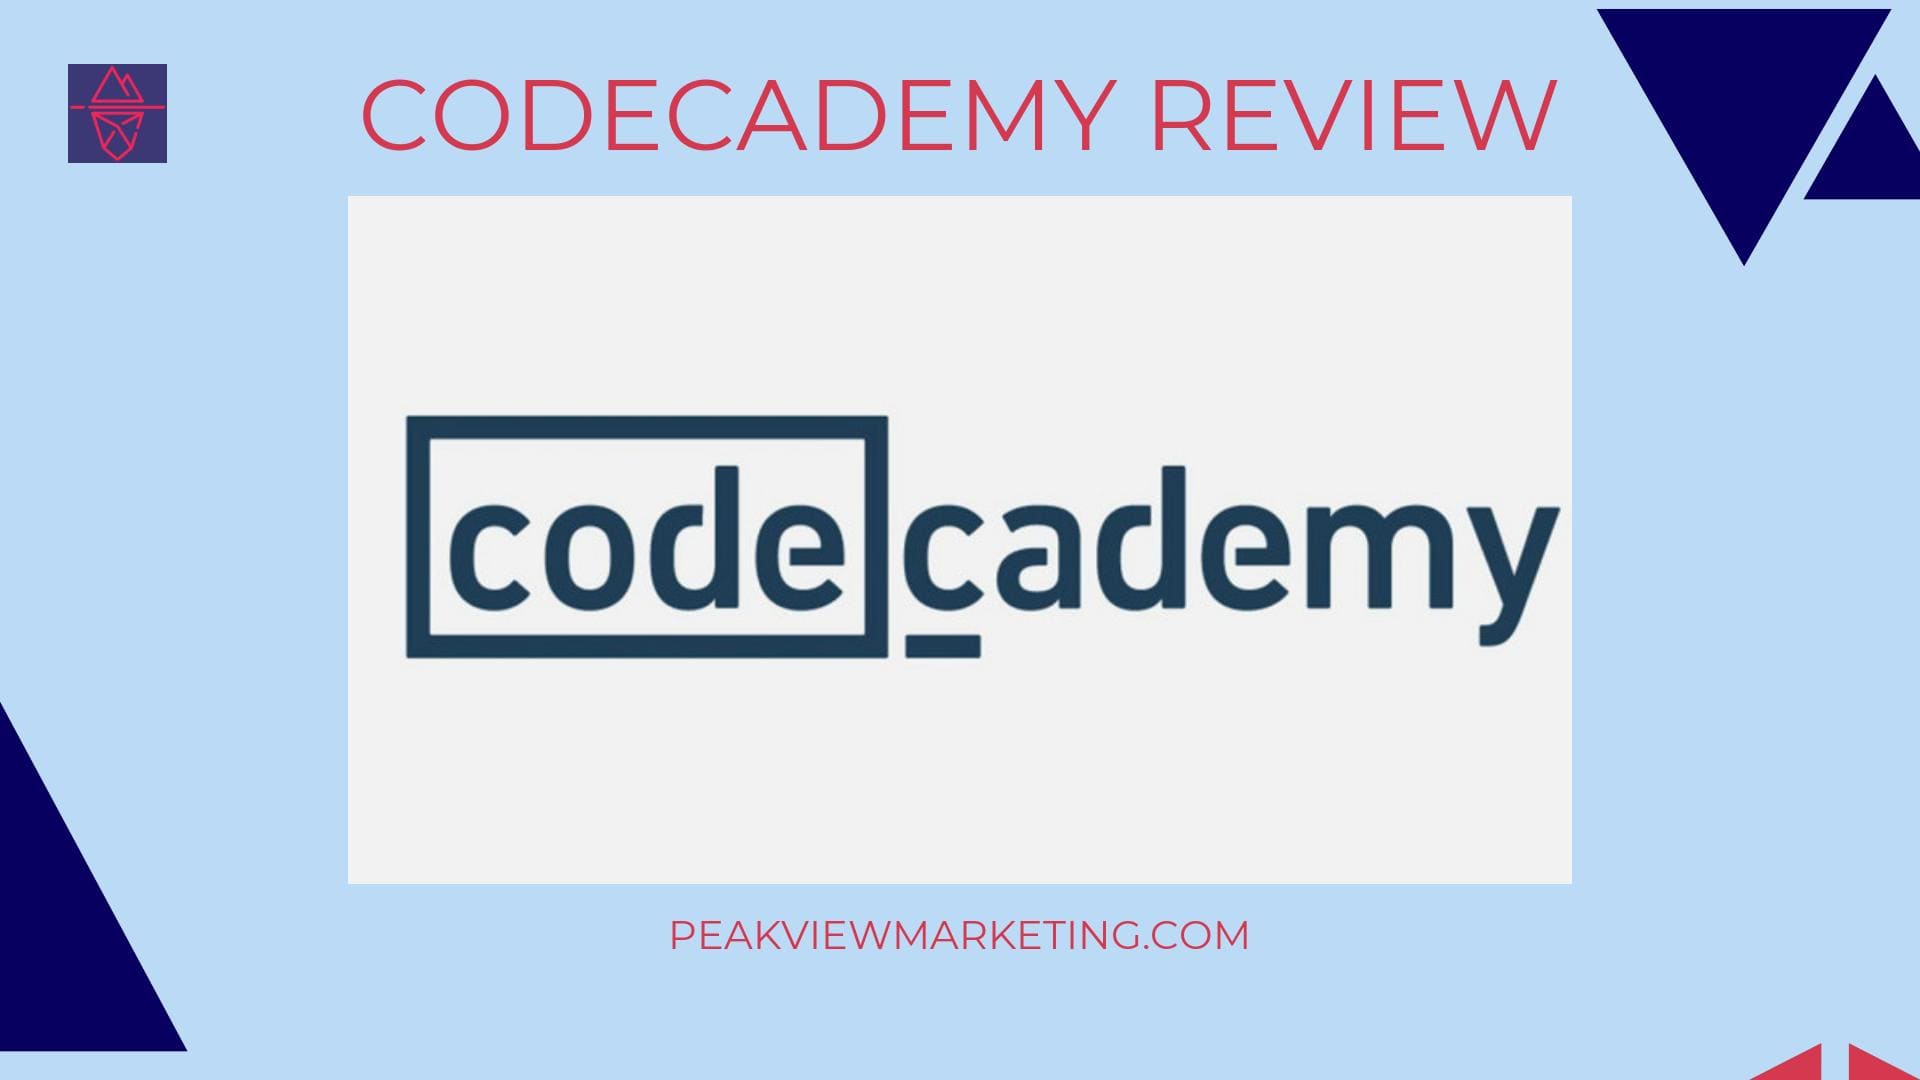 Codecademy Review Image